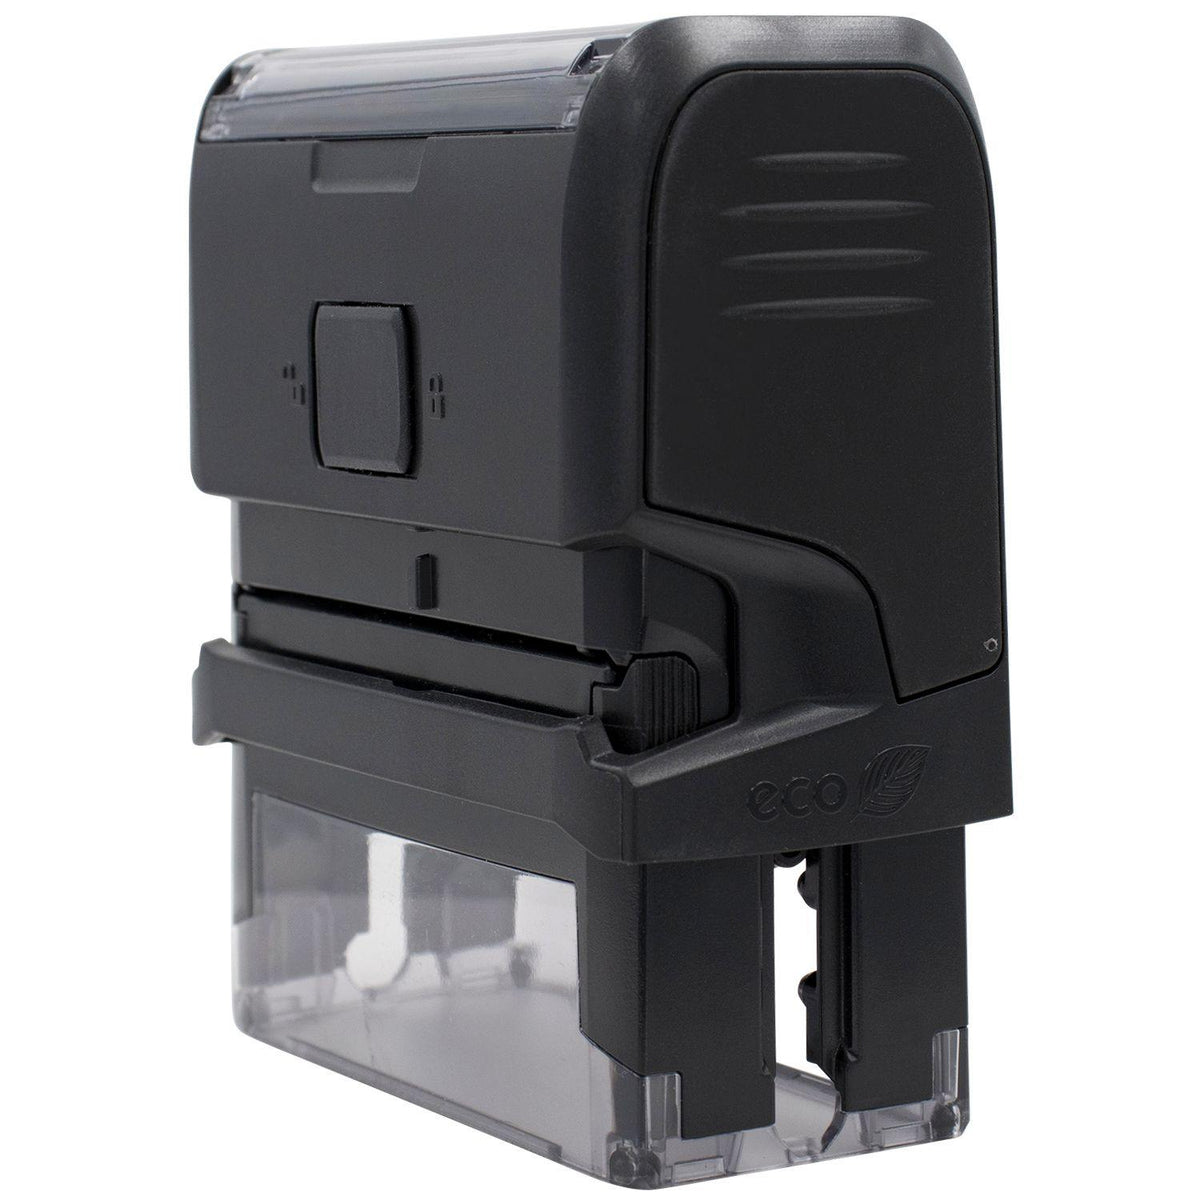 Large Self-Inking Correo Aero Stamp - Engineer Seal Stamps - Brand_Trodat, Impression Size_Large, Stamp Type_Self-Inking Stamp, Type of Use_Postal &amp; Mailing, Type of Use_Shipping &amp; Receiving